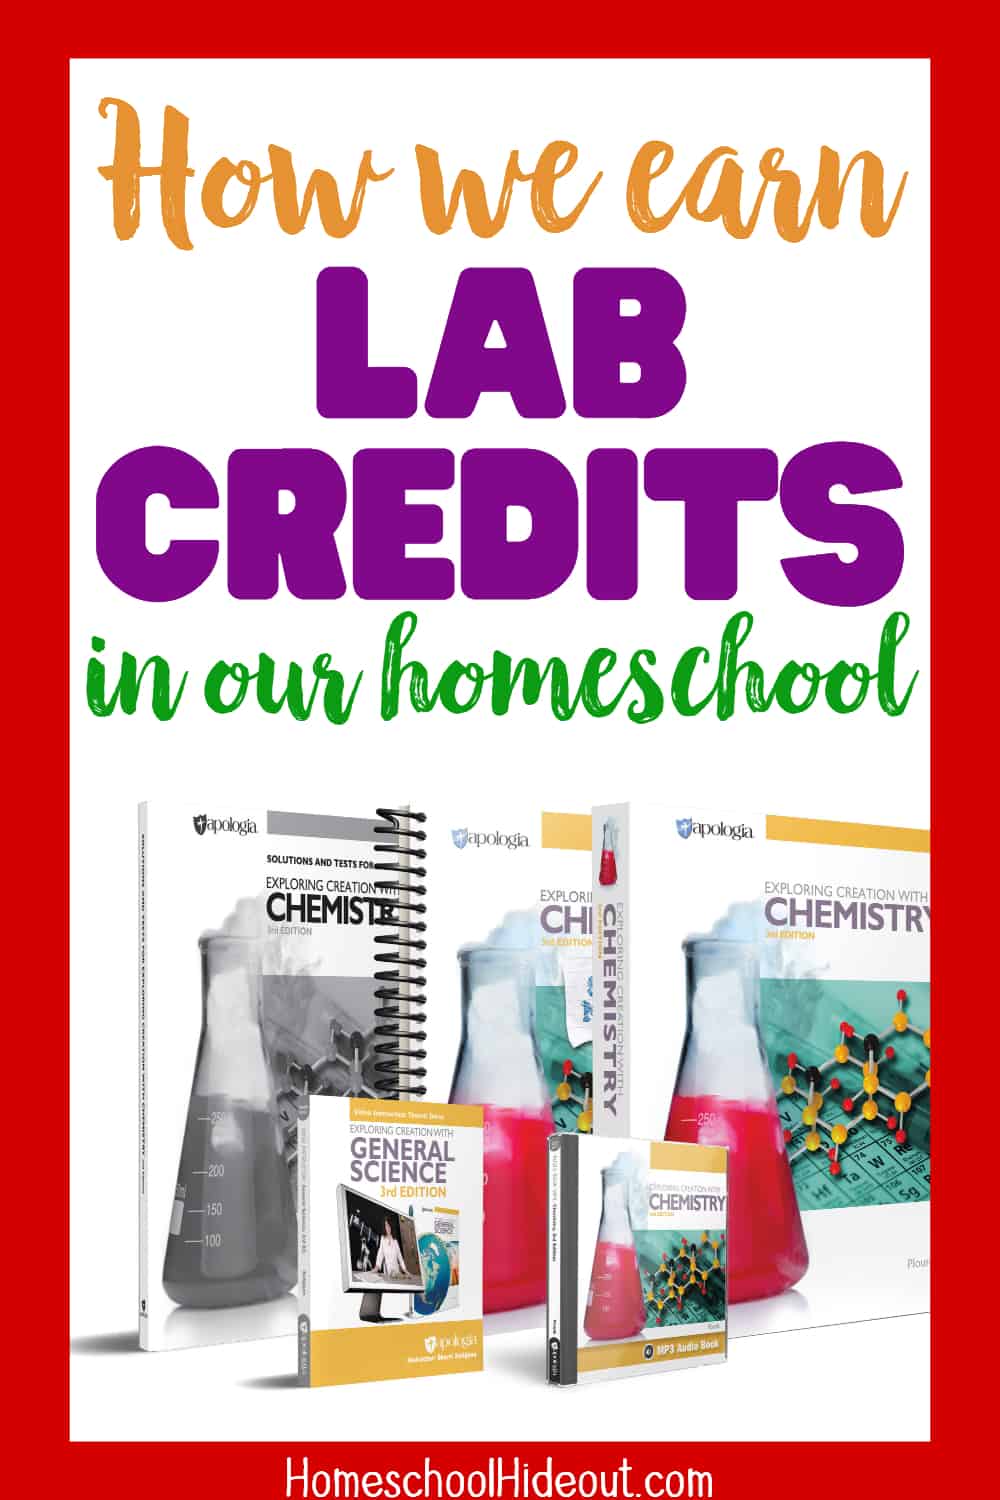 Apologia Chemistry is just what we needed in our high school homeschool. It provides a lab credit, comes with videos, textbooks, student notebook and more! It's perfect for self-motivated learners.